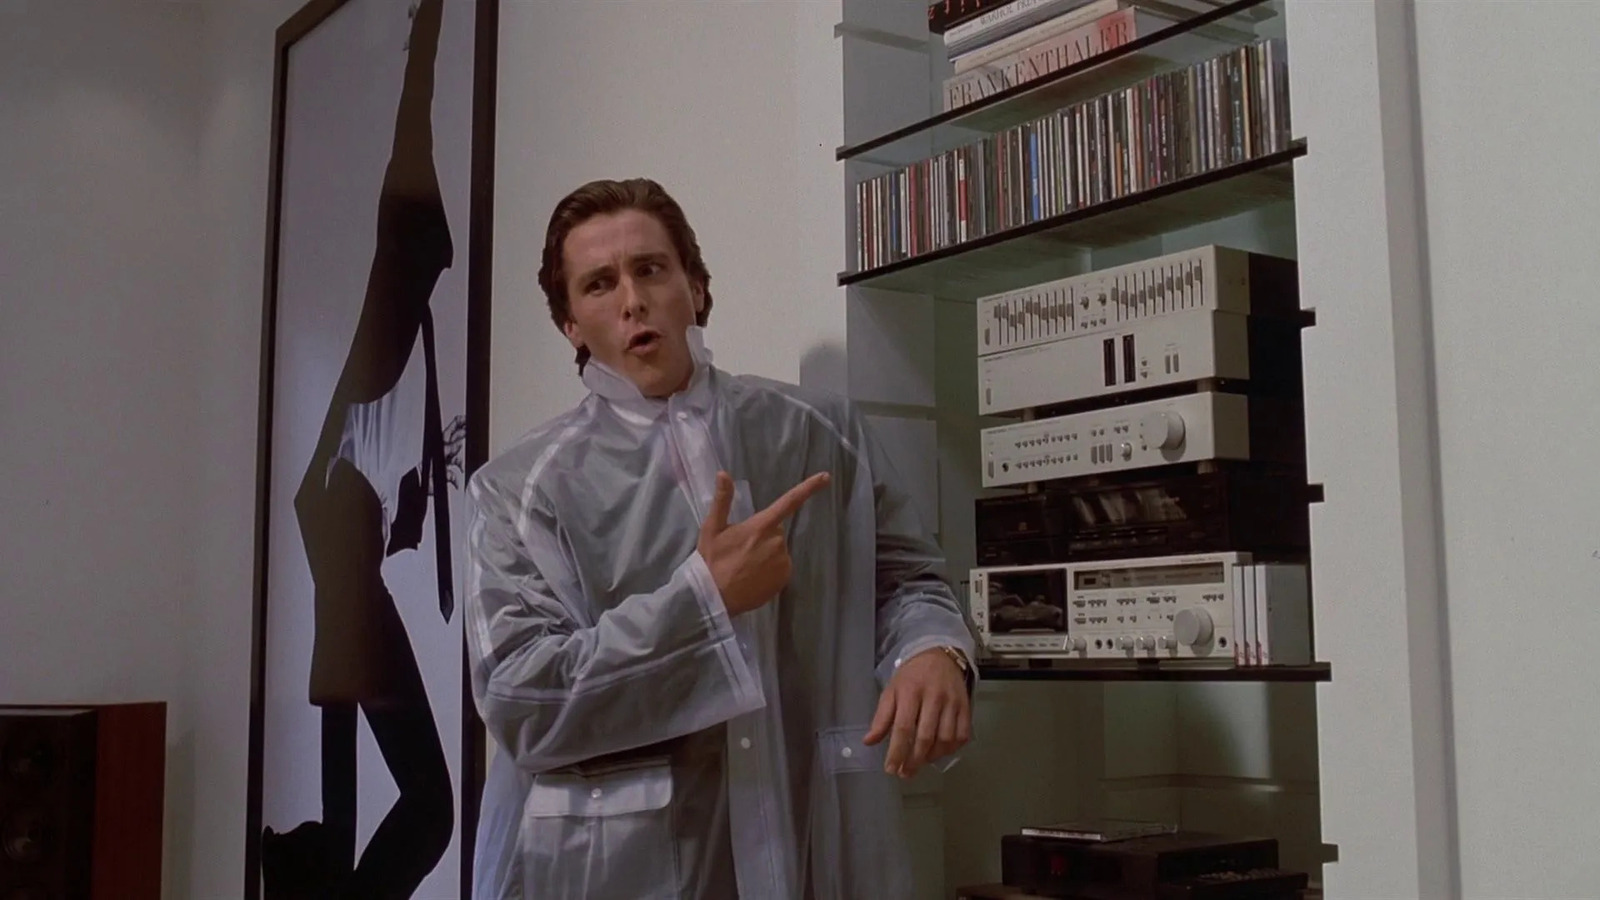 An American Psycho Publicity Stunt Made Huey Lewis Never Want To See The Movie